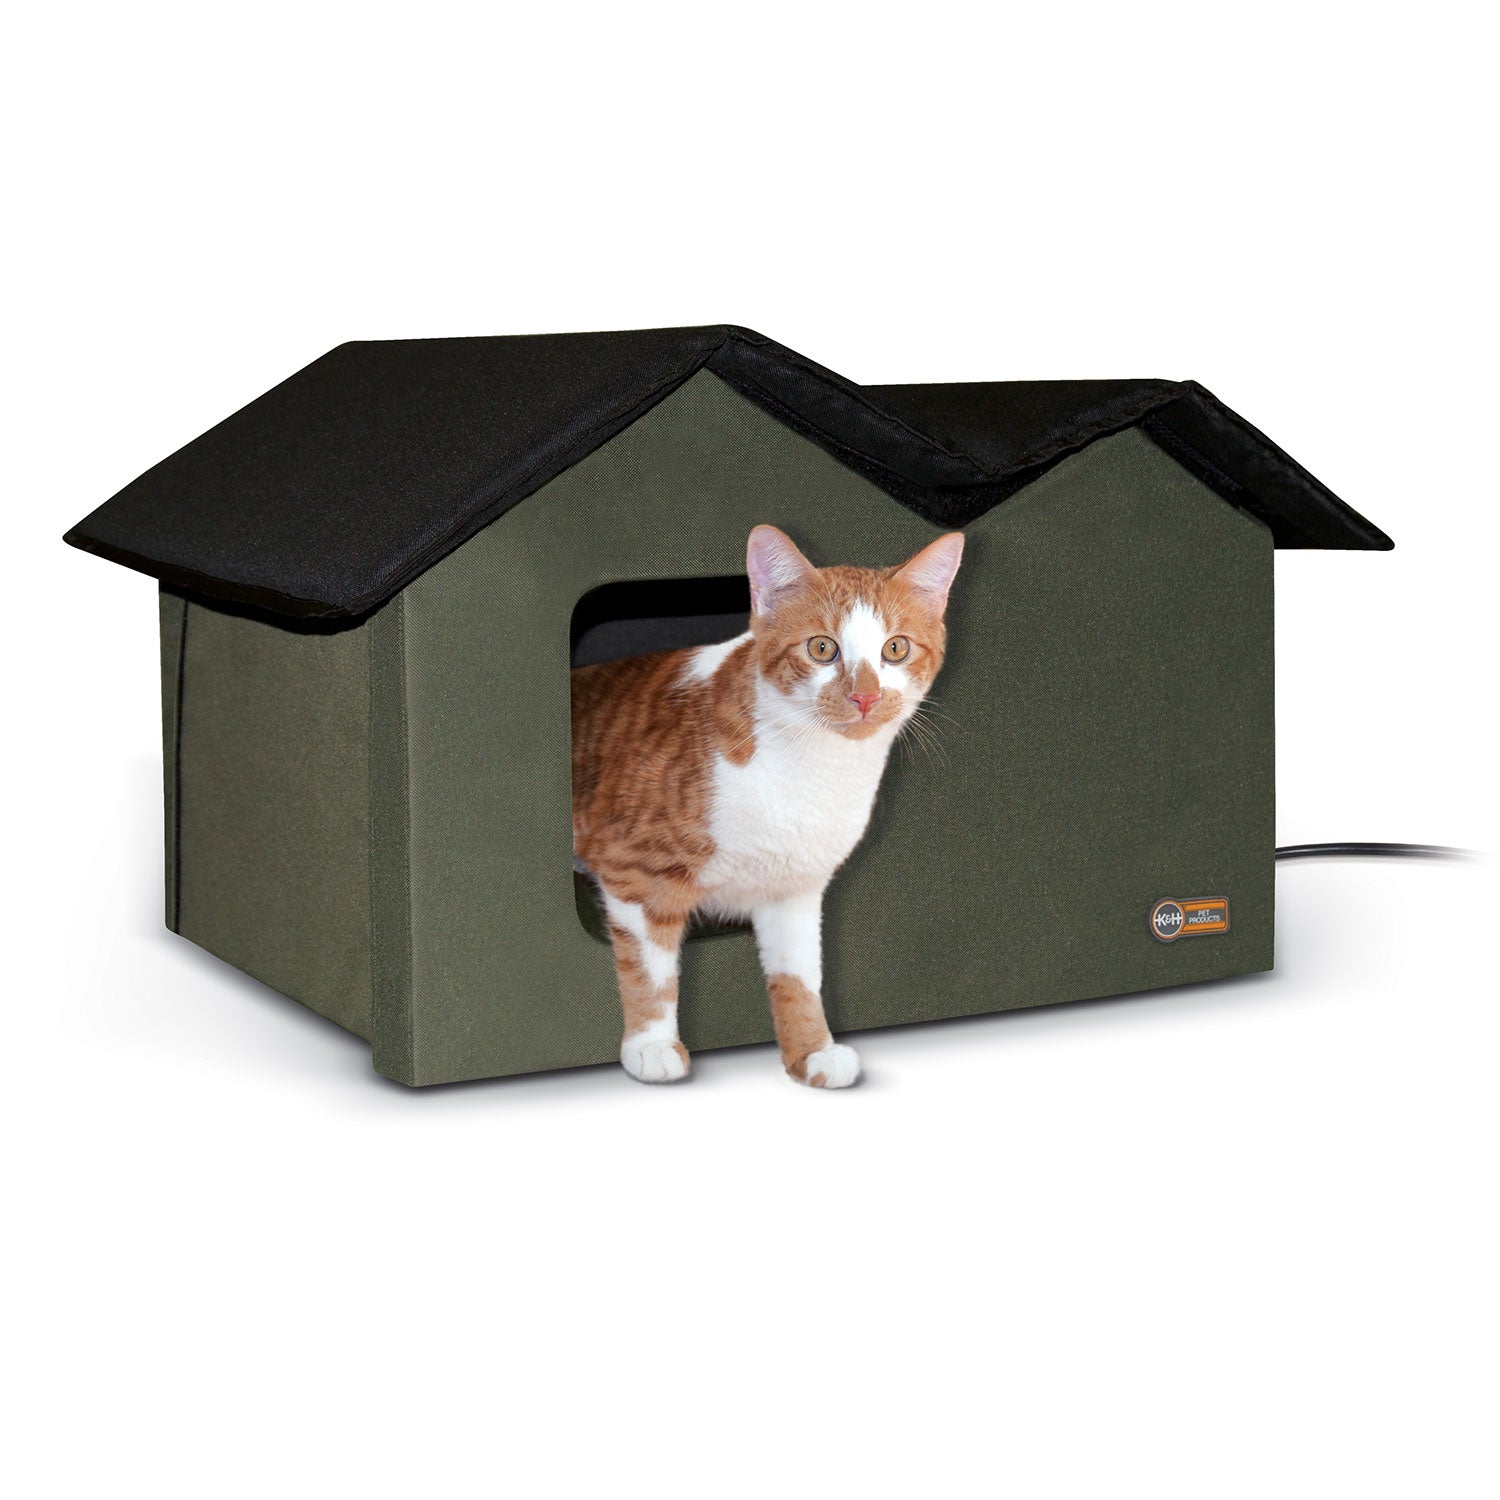 K&h Pet Products Kh3973 Heated Outdoor Kitty House Extra Wide